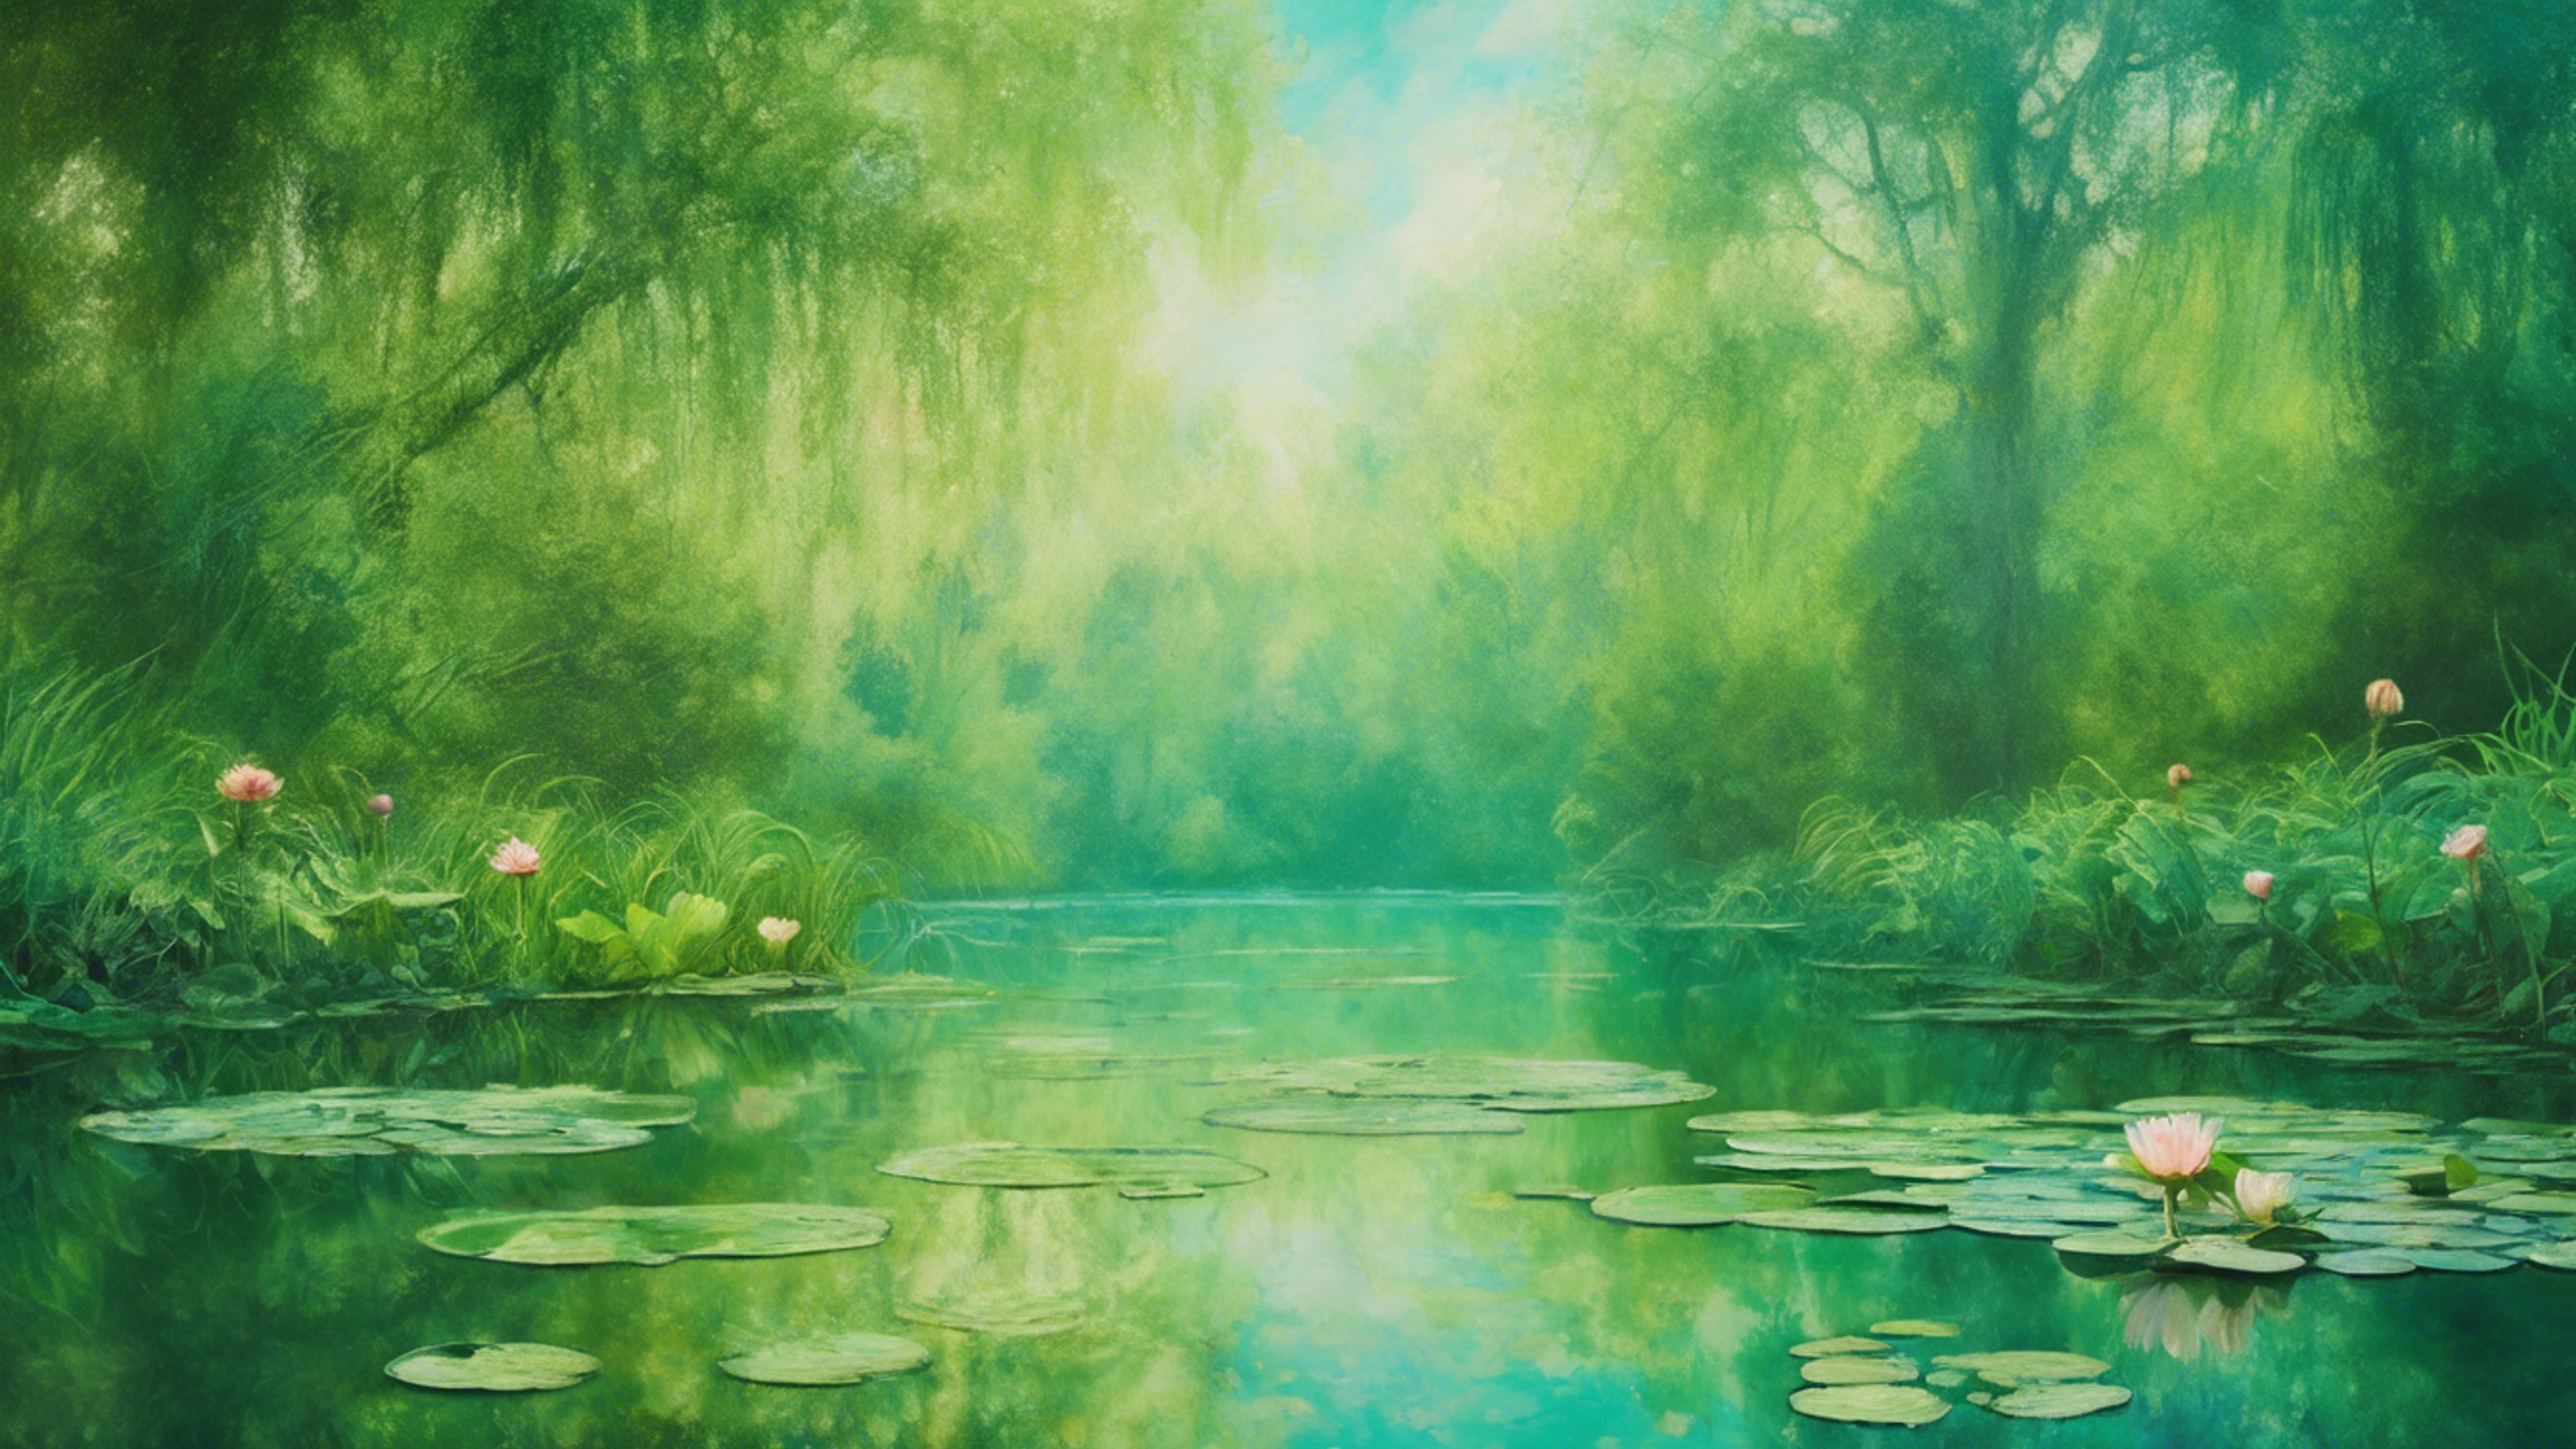 A landscape painting inspired by Monet's Water Lilies, with cool green hues. Tapeta na zeď[9f0abb477fe746e08ba1]